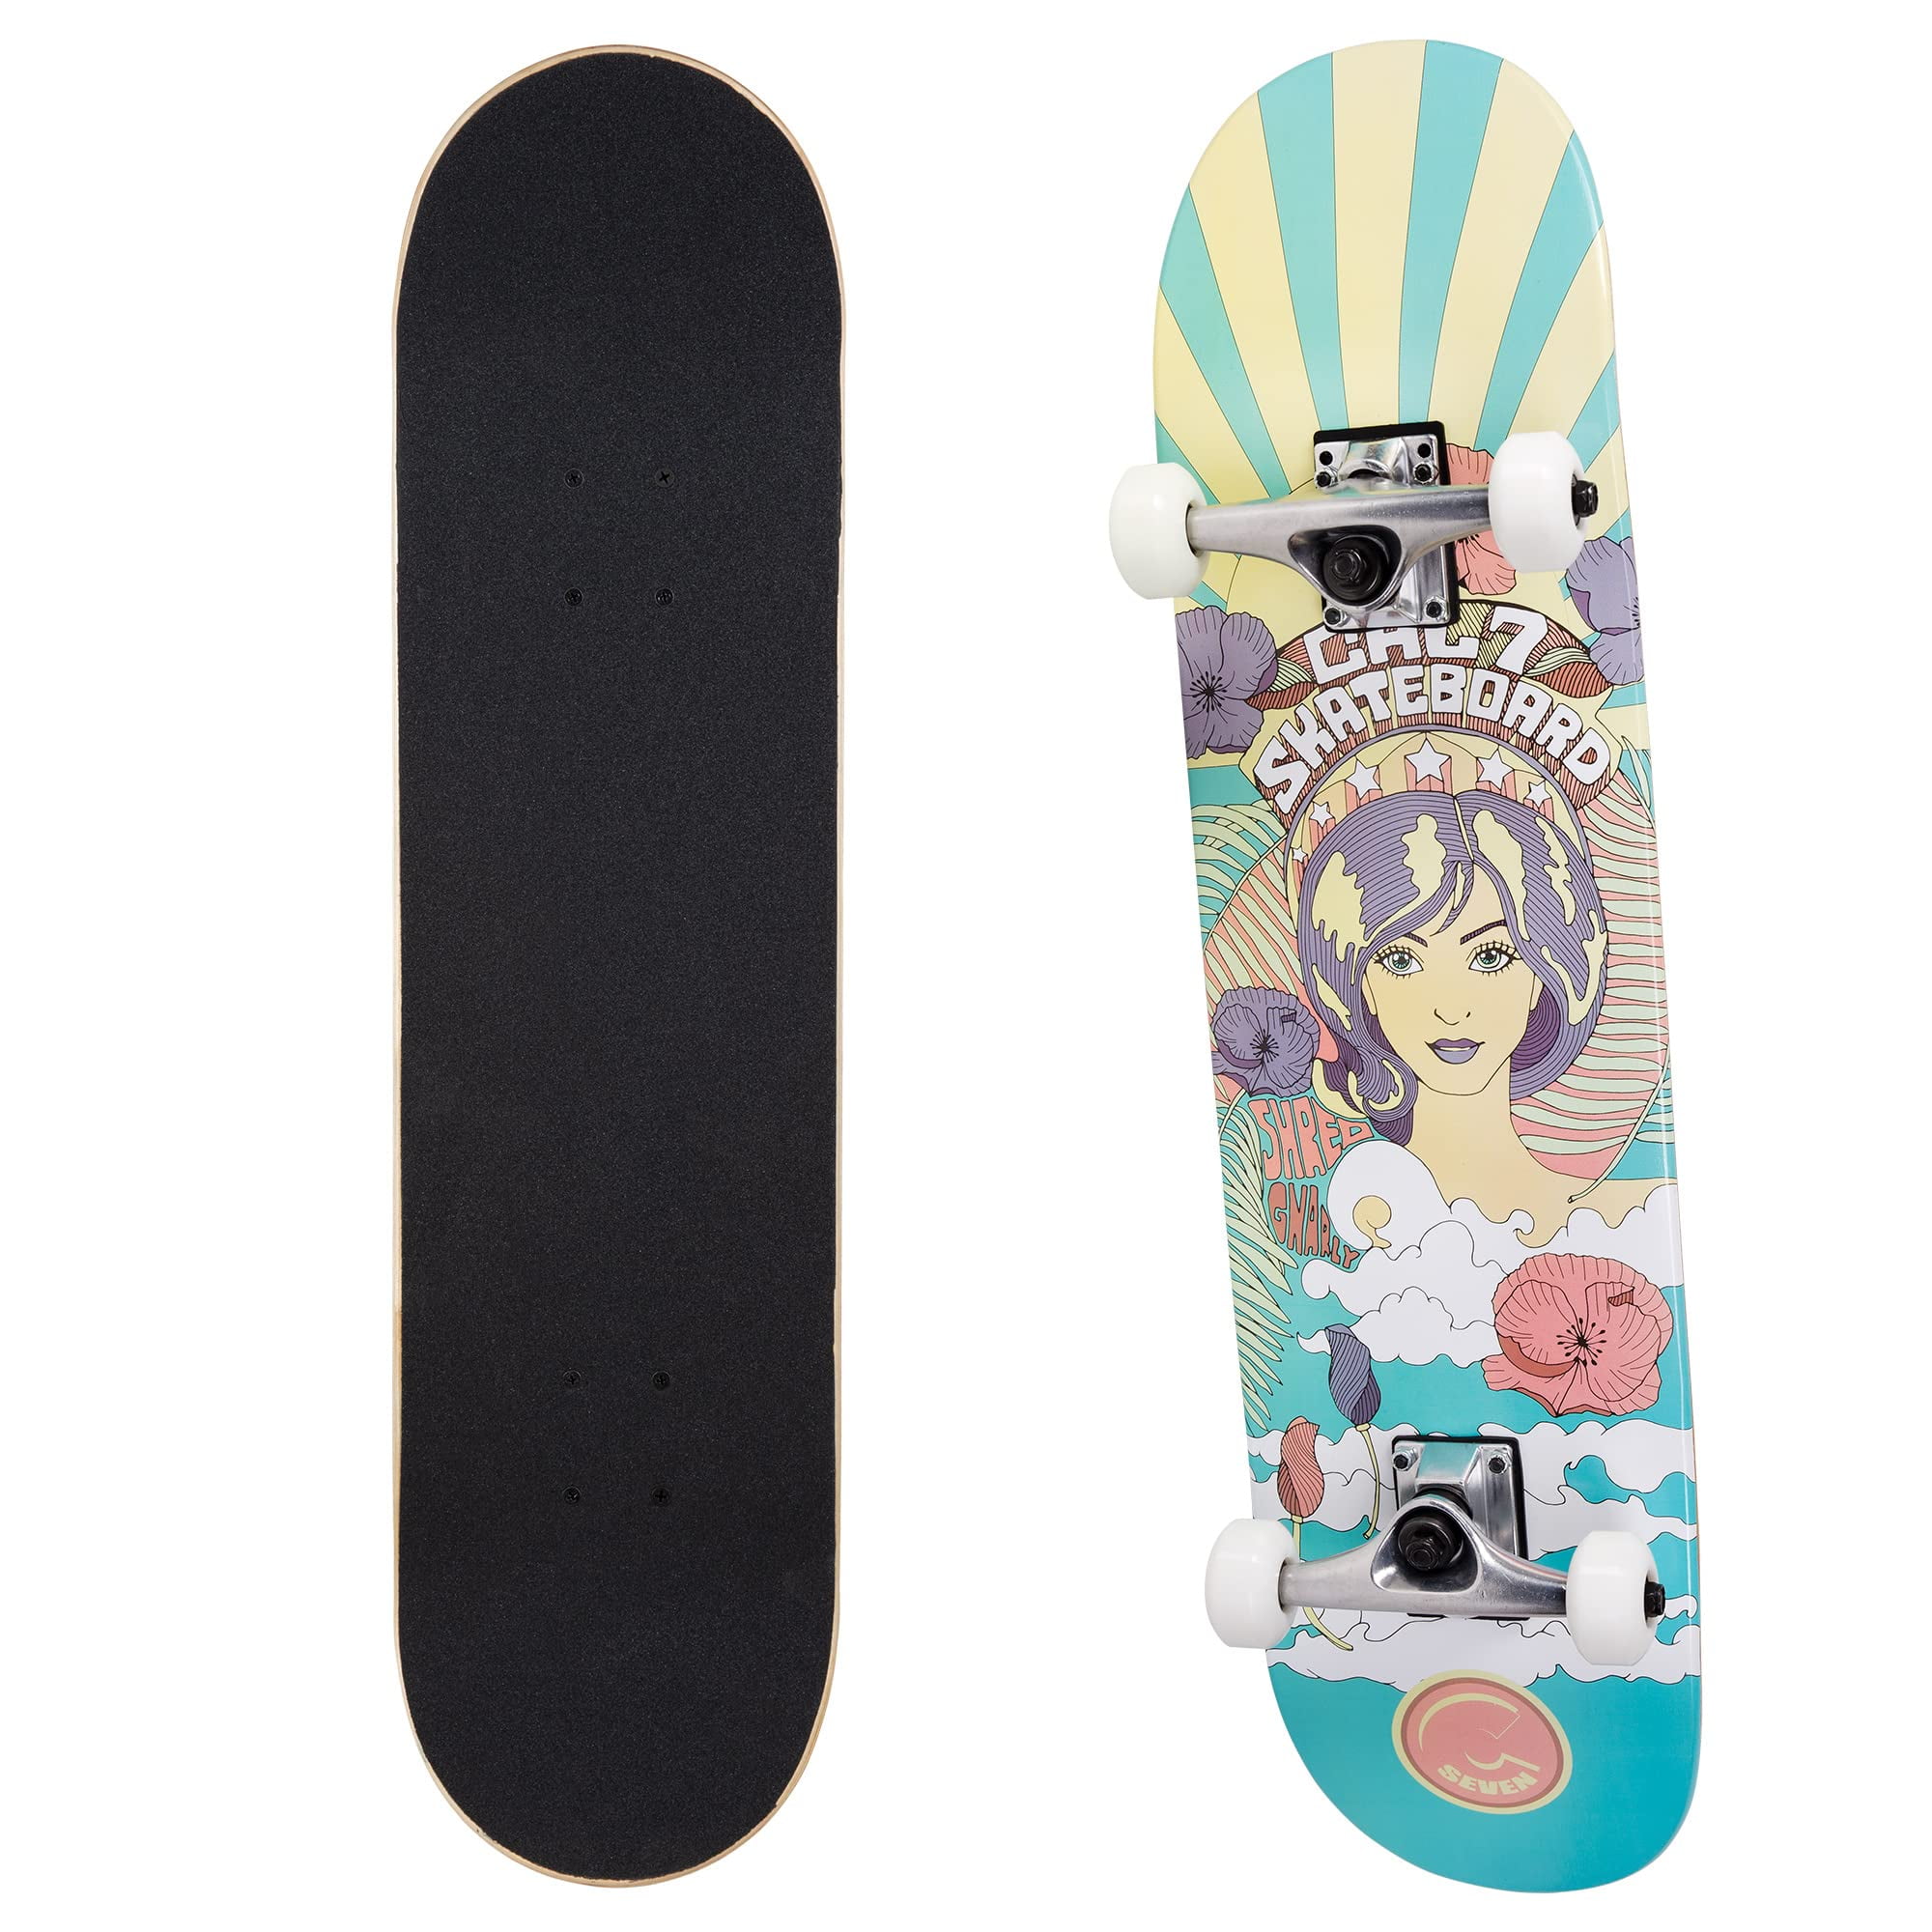 Cal 7 Complete Skateboard 7.75 8.0 Inch 